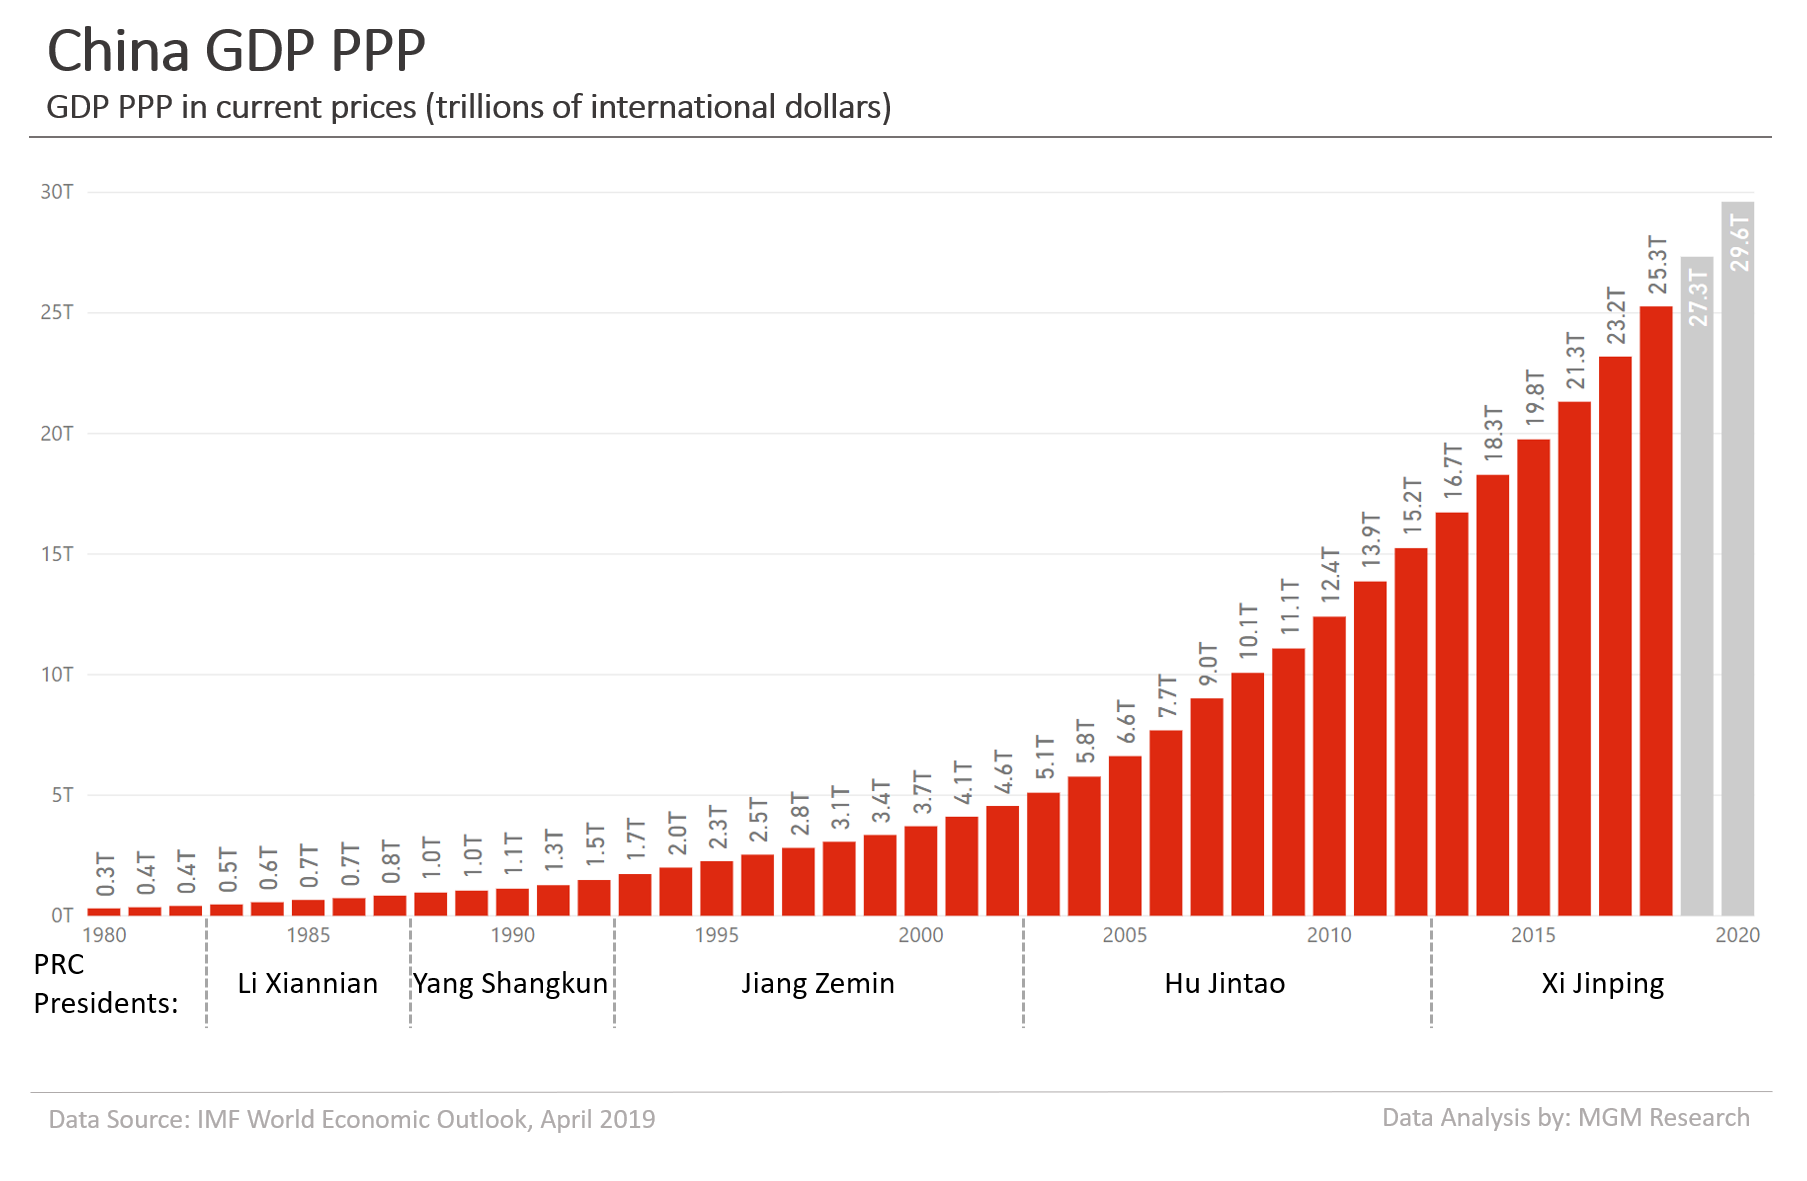 China GDP PPP 1980-2020